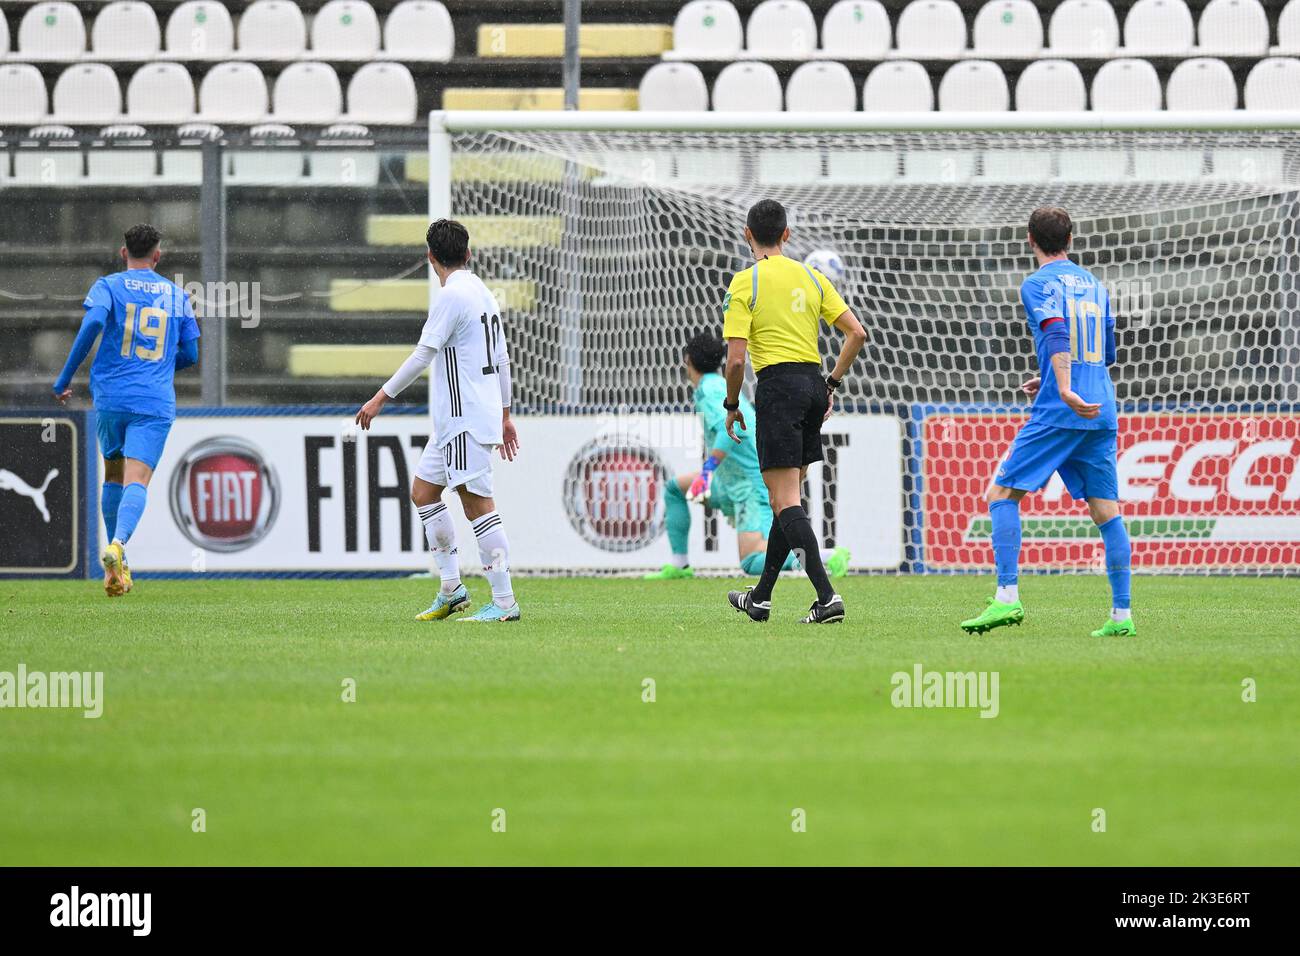 26th September 2022; Teofilo Tadini Stadium, Castel di Sangro, Italy; U21 Friendly football Match, Italy versus Japan; Lorenzo Colombo of Italy scores the goal for 1-0 in the 38th minute Stock Photo